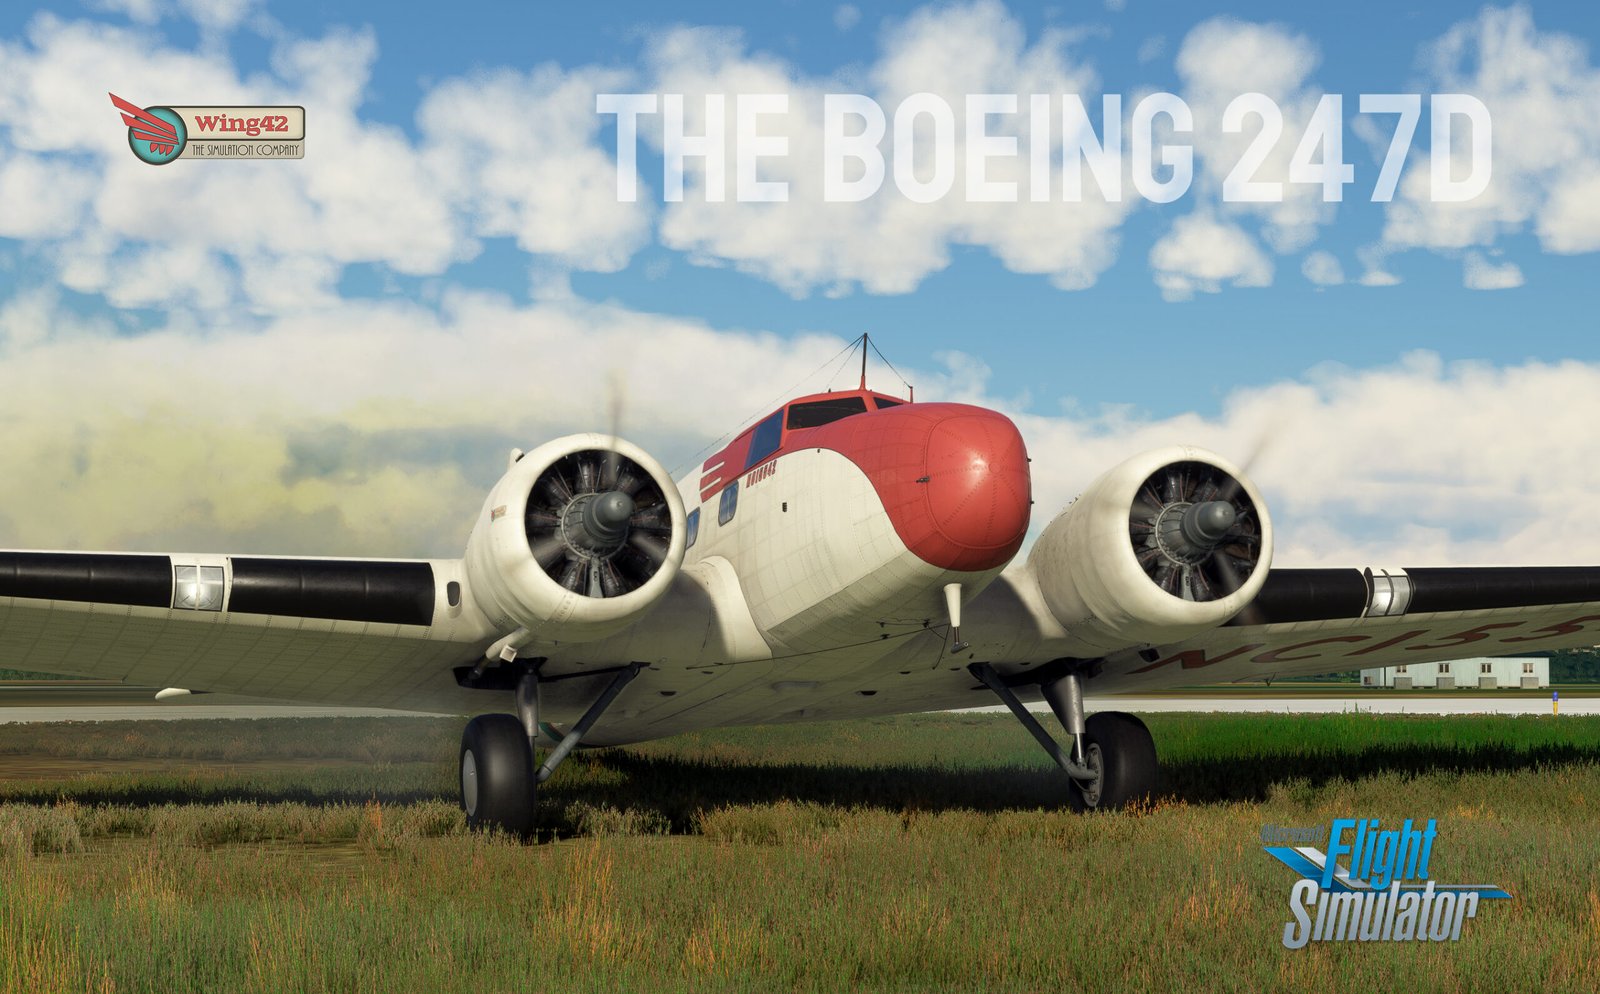 wing42_boeing247d_thumbnail-scaled.jpg